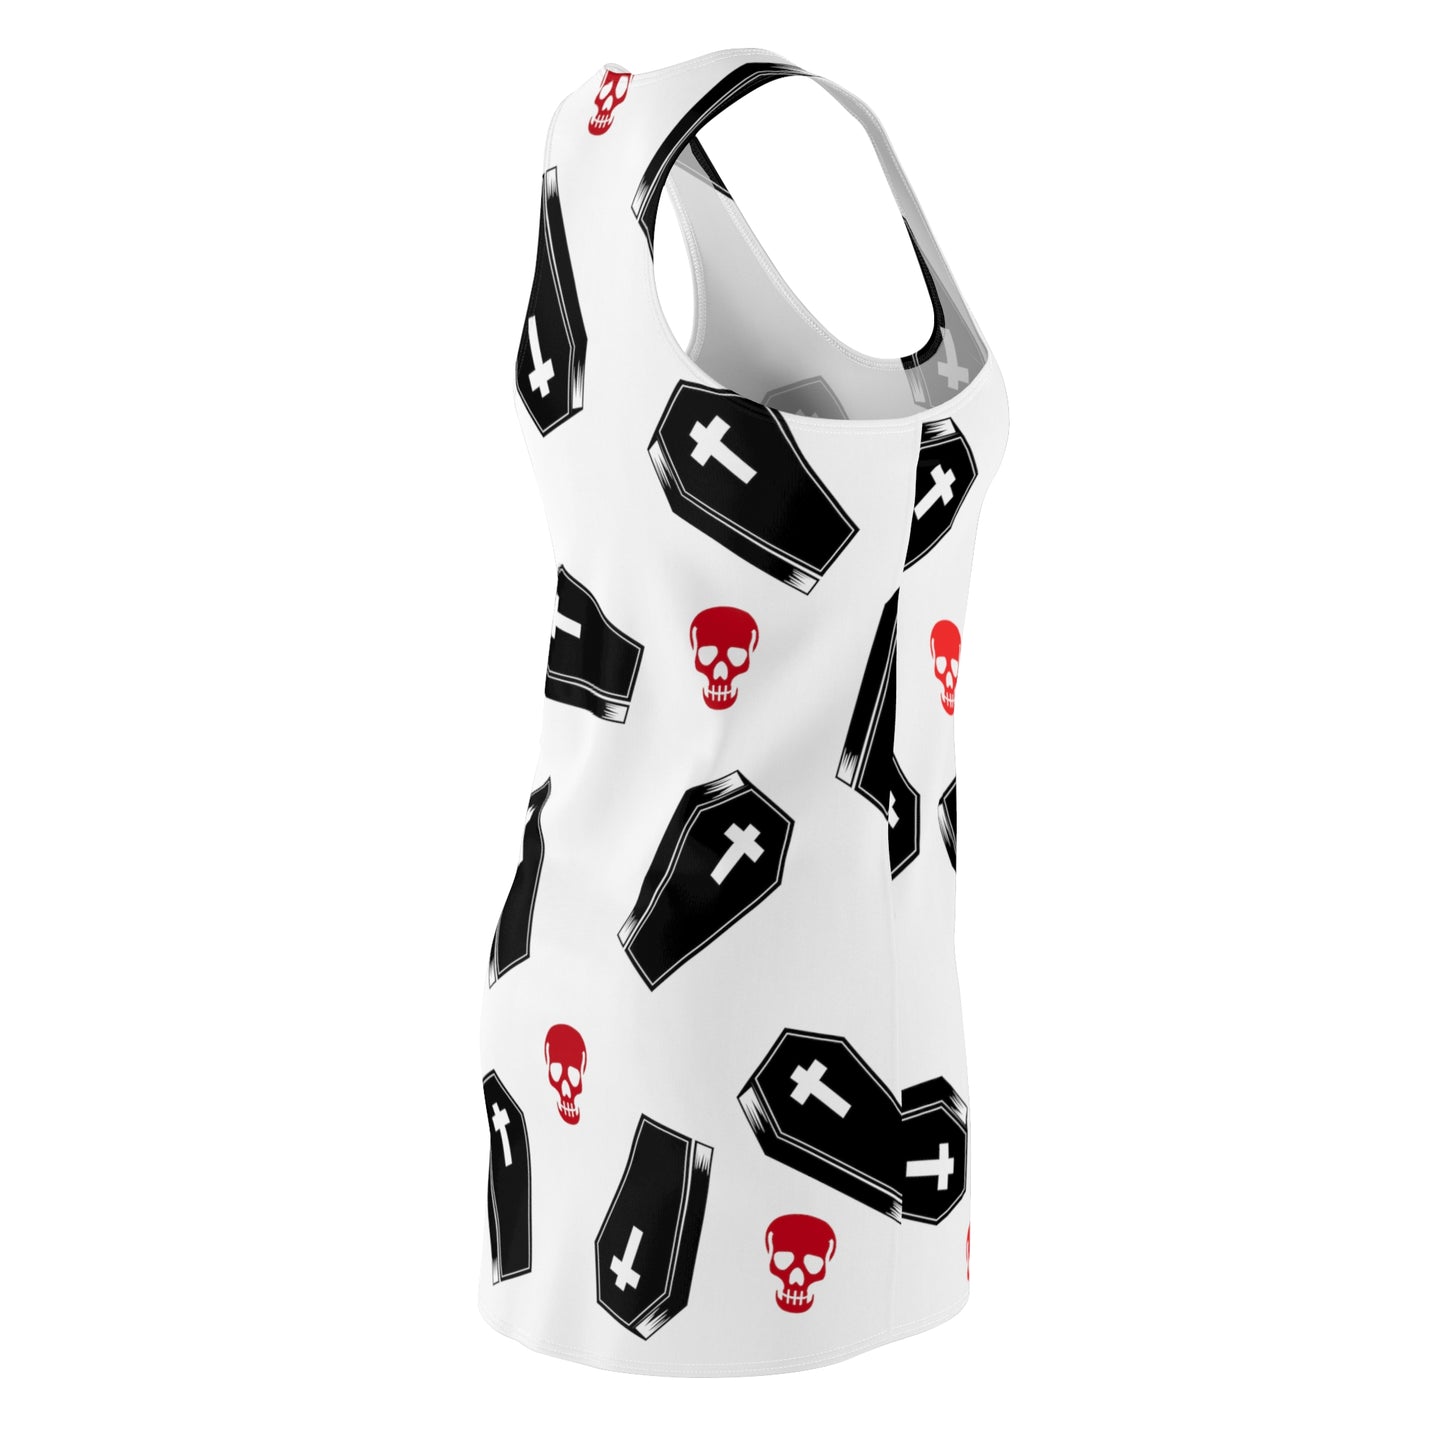 Coffin and Red Skull Racerback Dress